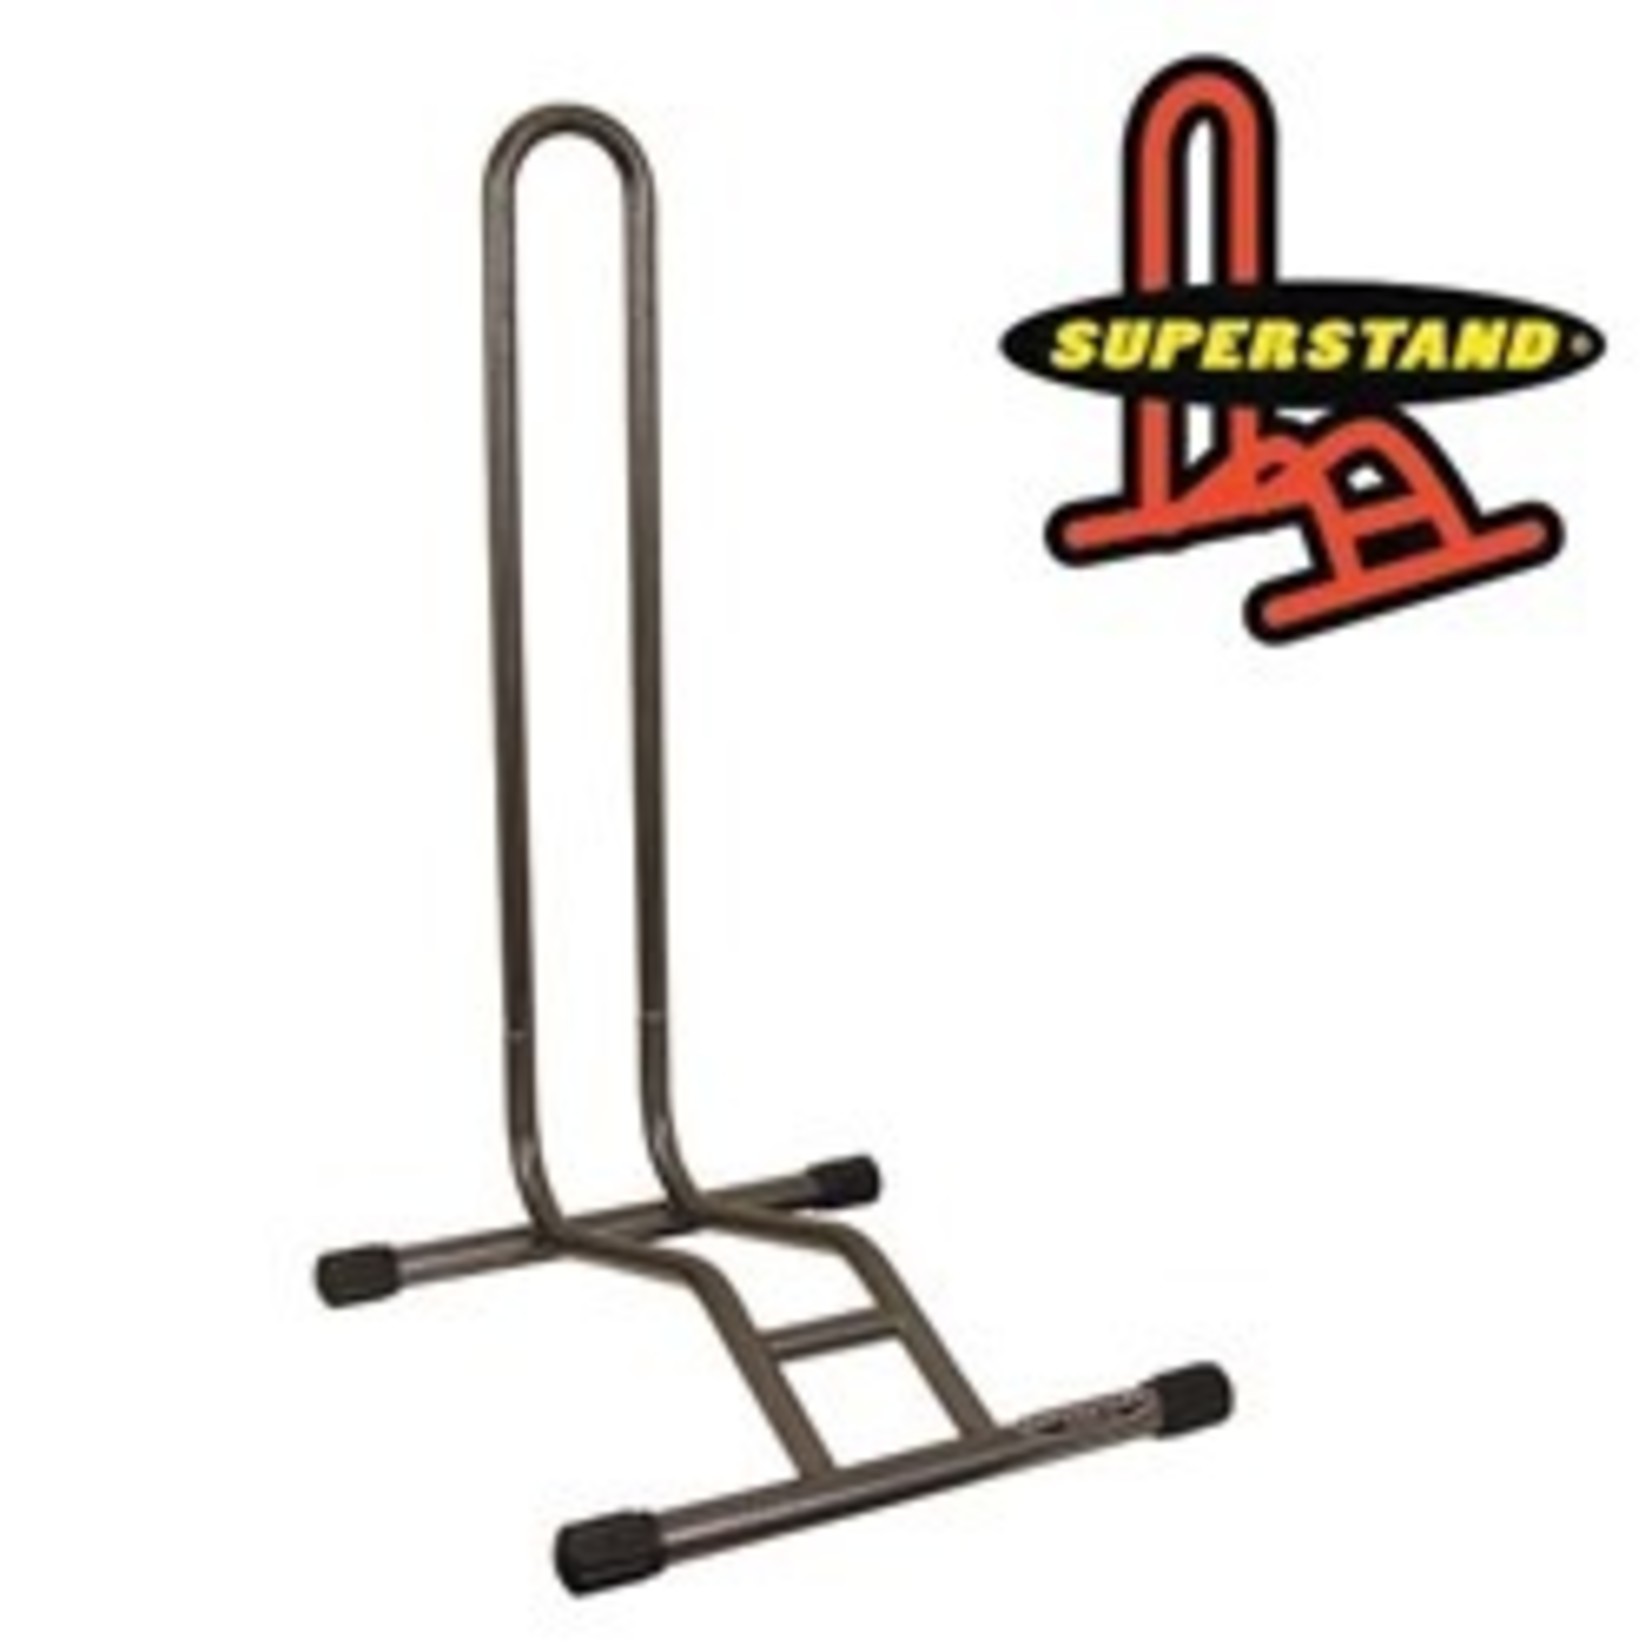 Superstand Superstand Bike/Cycling Stand - Extreme Rack - Single Bicycle Storage Stand